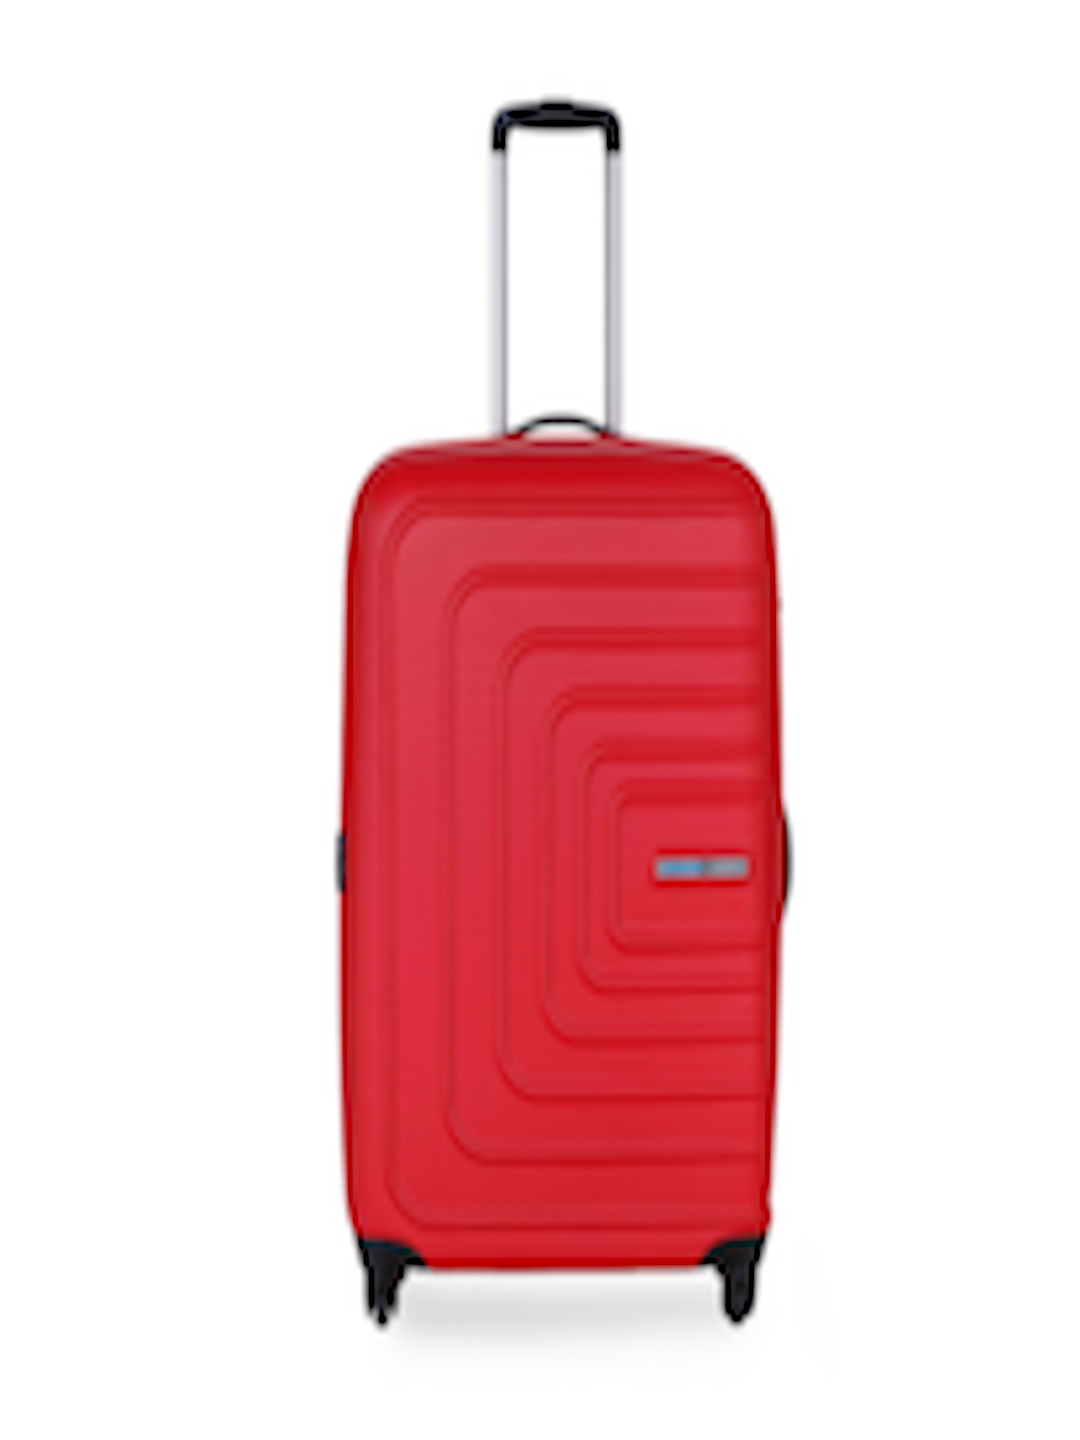 american tourister red travel suitcase